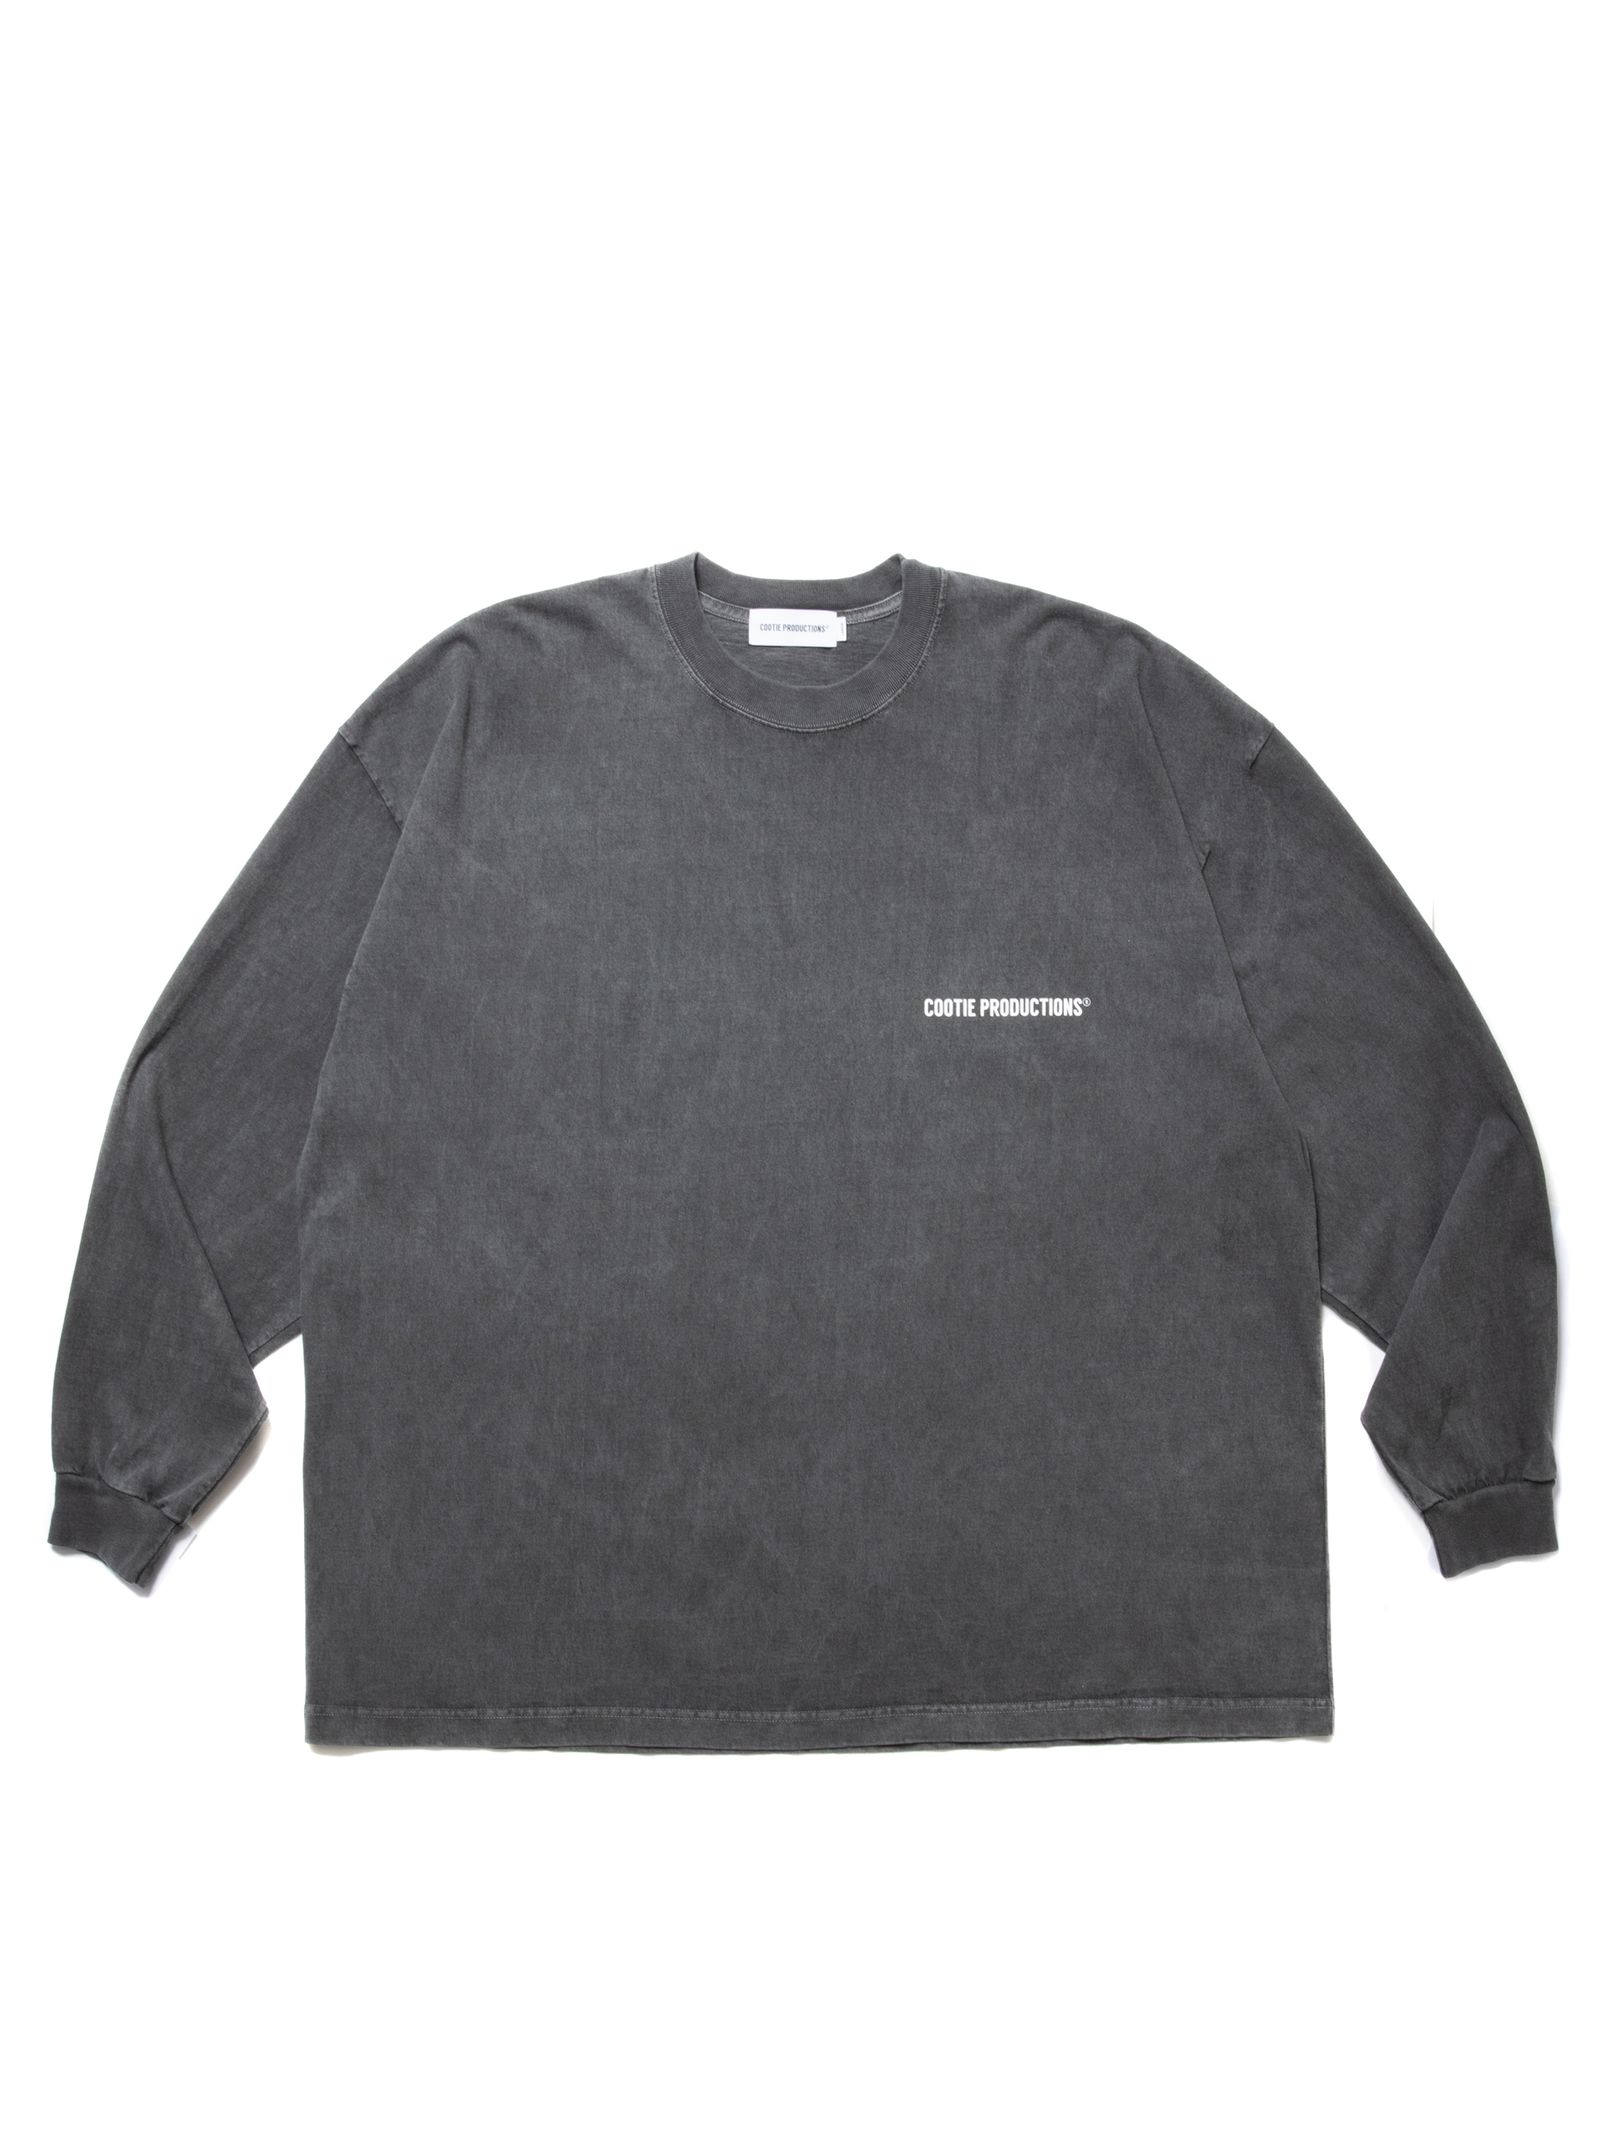 COOTIE PRODUCTIONS - Pigment Dyed L/S Tee / Black 